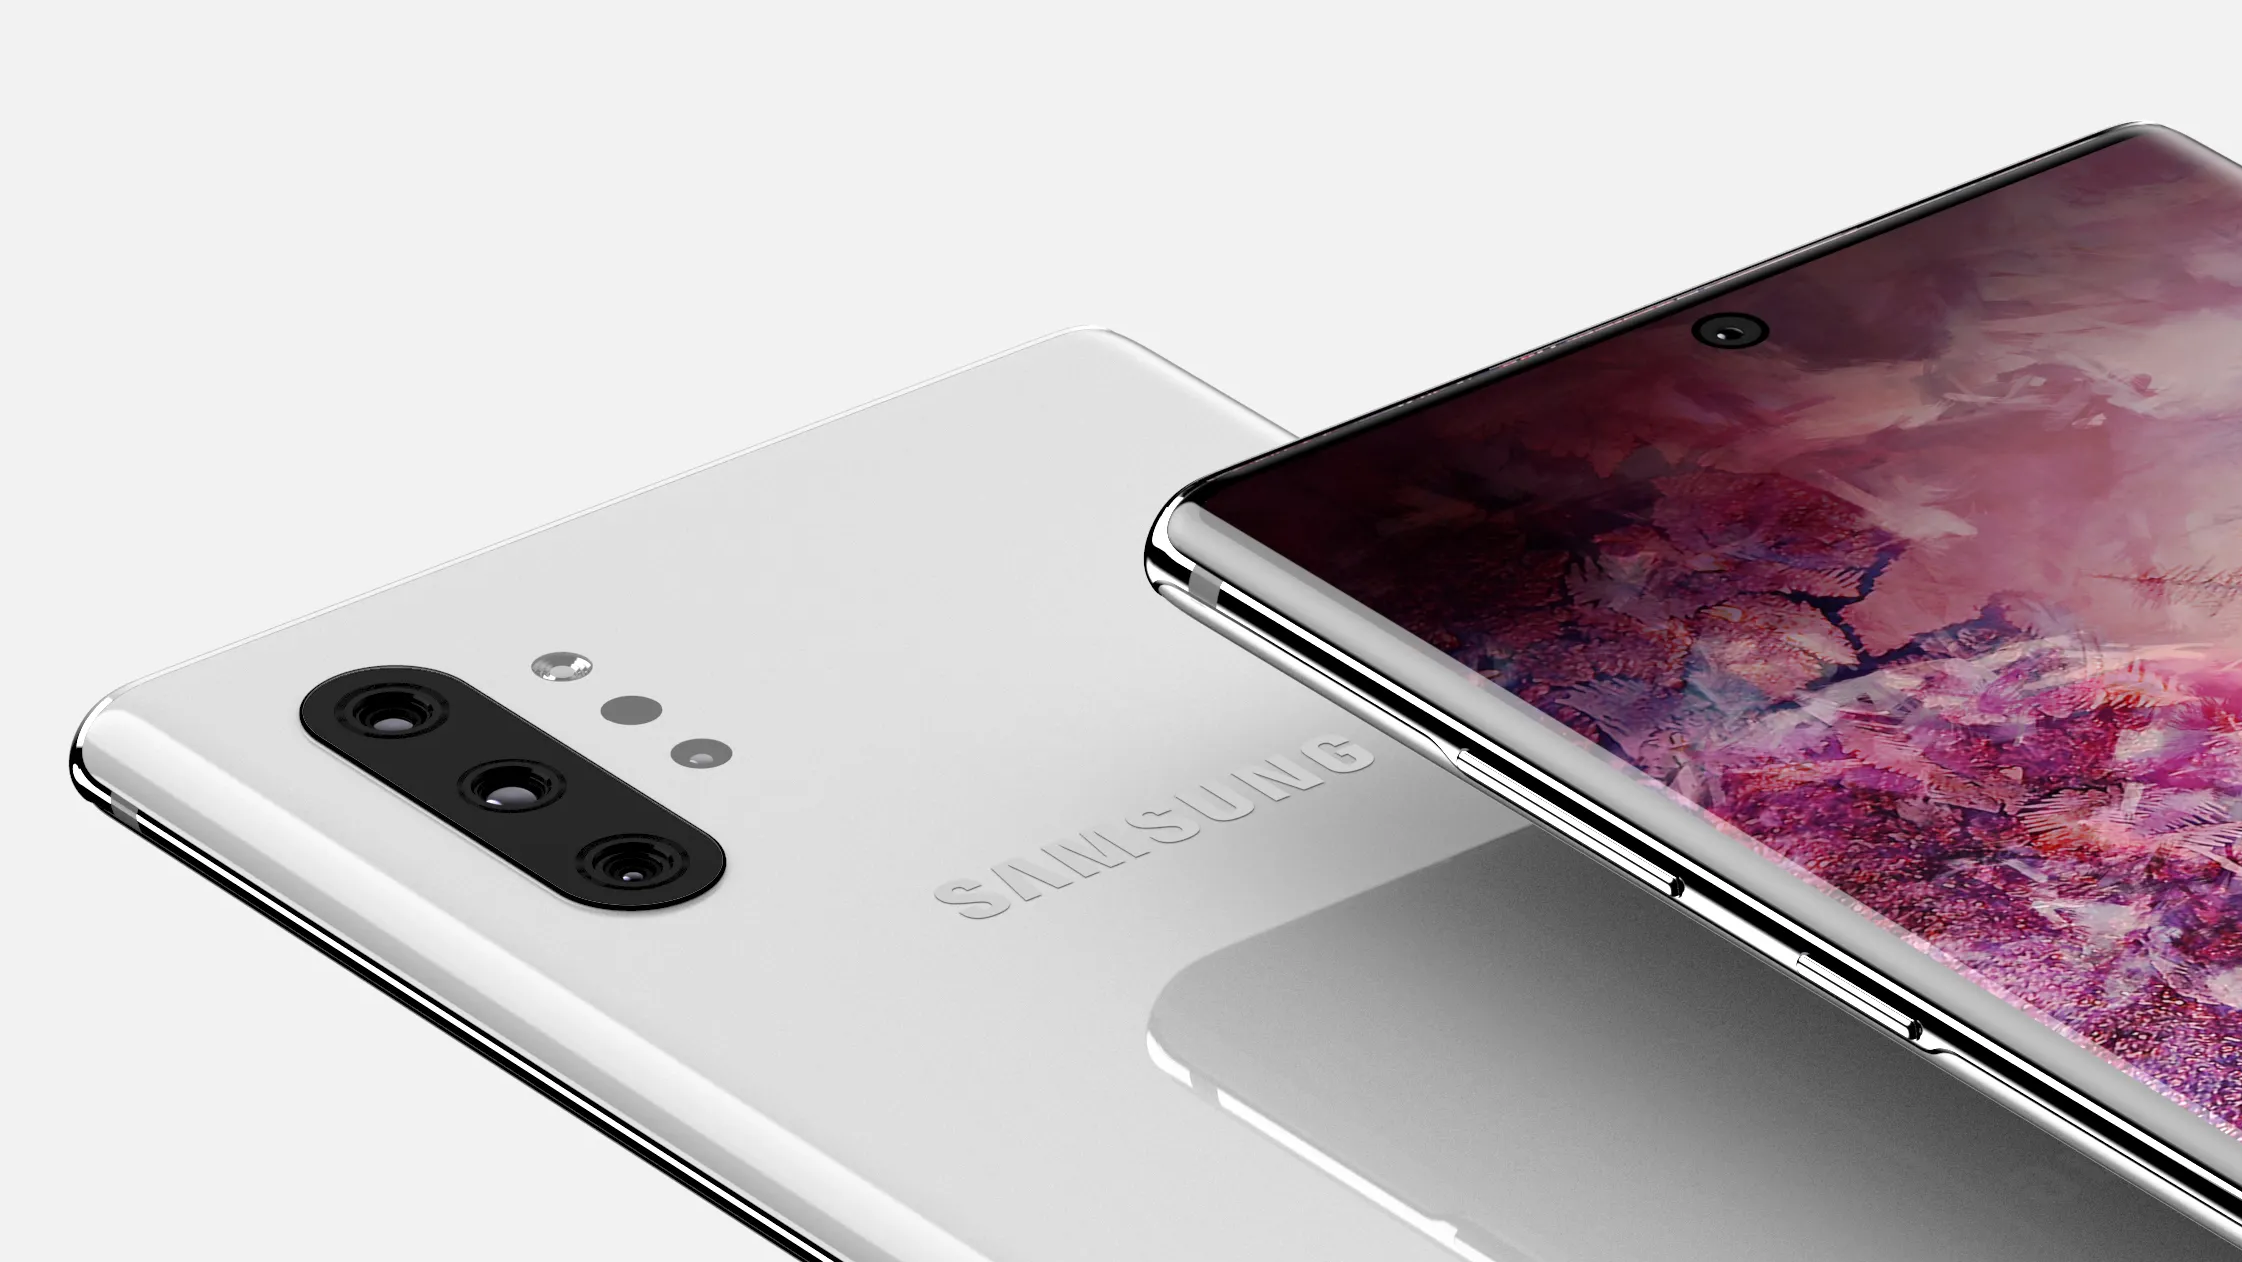 First 'Galaxy Note 10 Pro' Renders Appear And They Impress